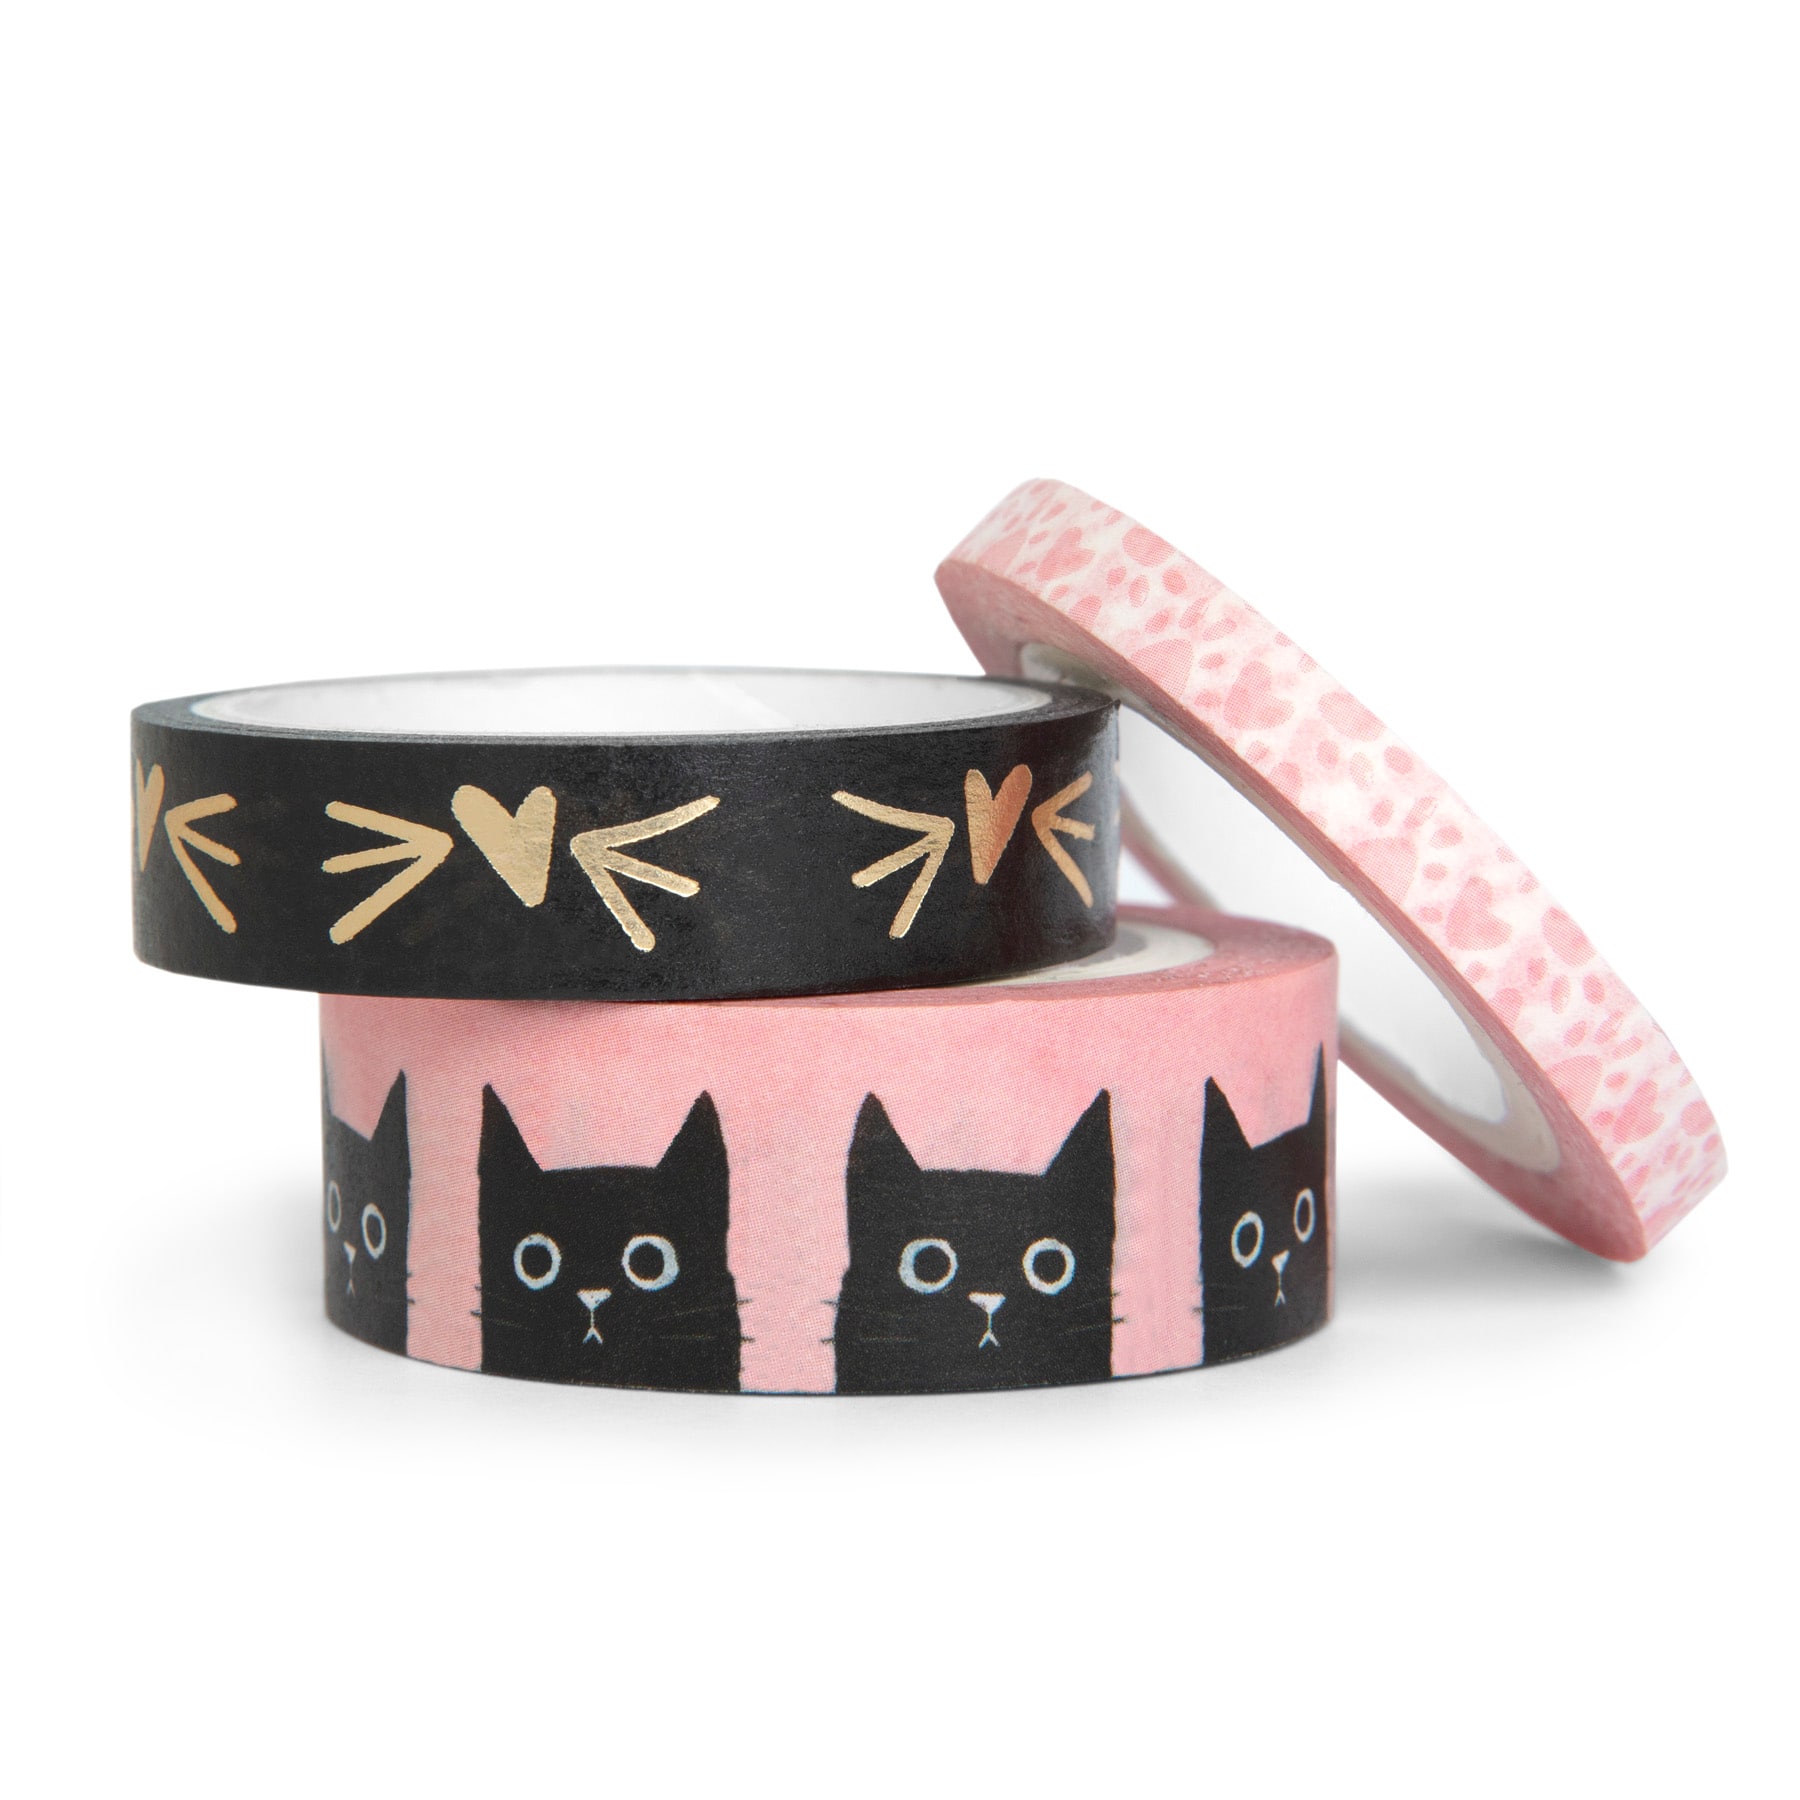 Recollections Cat Washi Tapes - Each